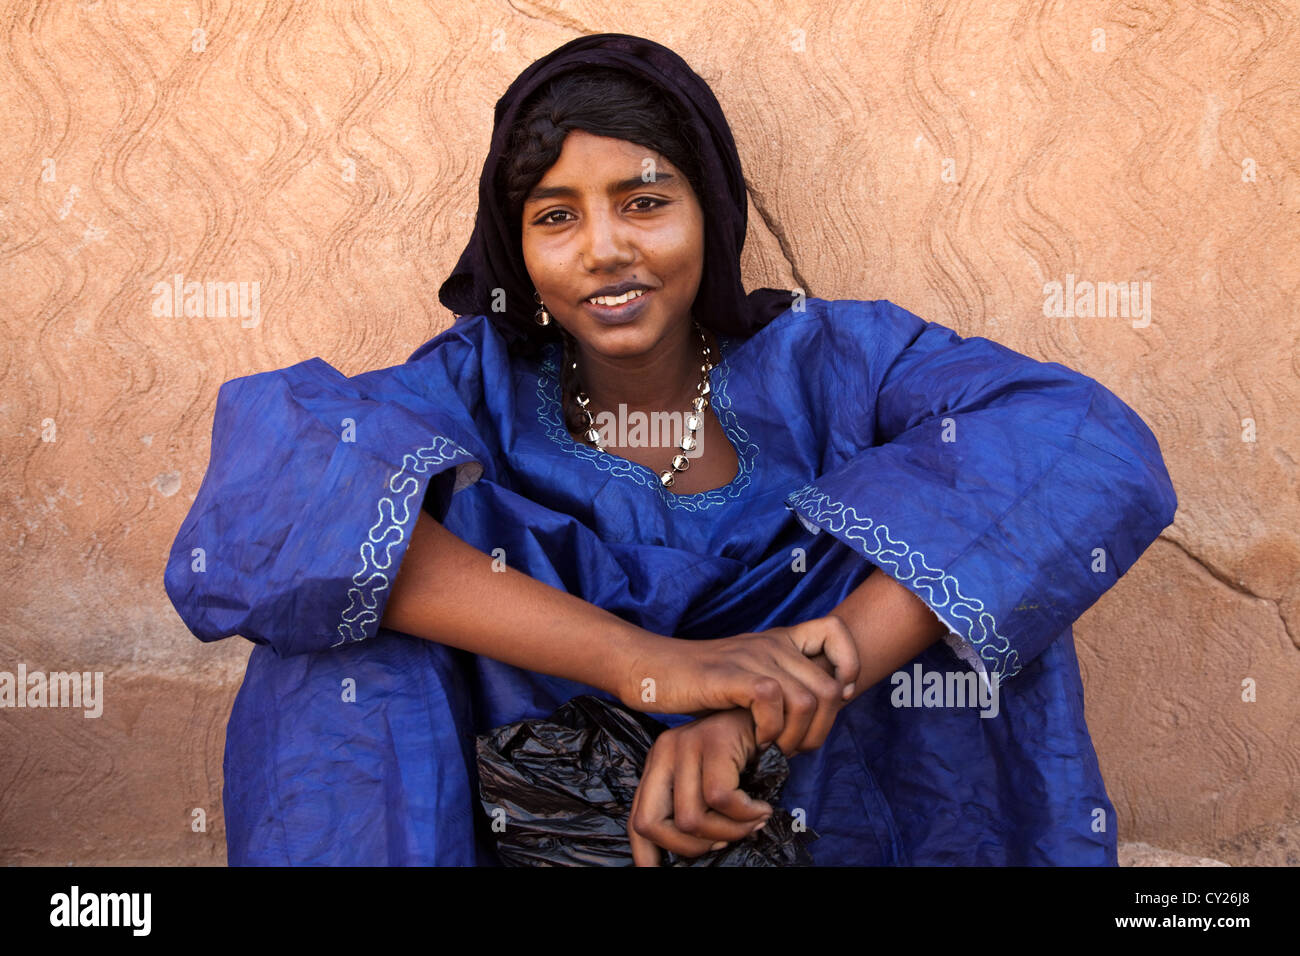 Portrait of a young Tuareg woman wearing a blue dress, Ingal, Niger, Africa Stock Photo